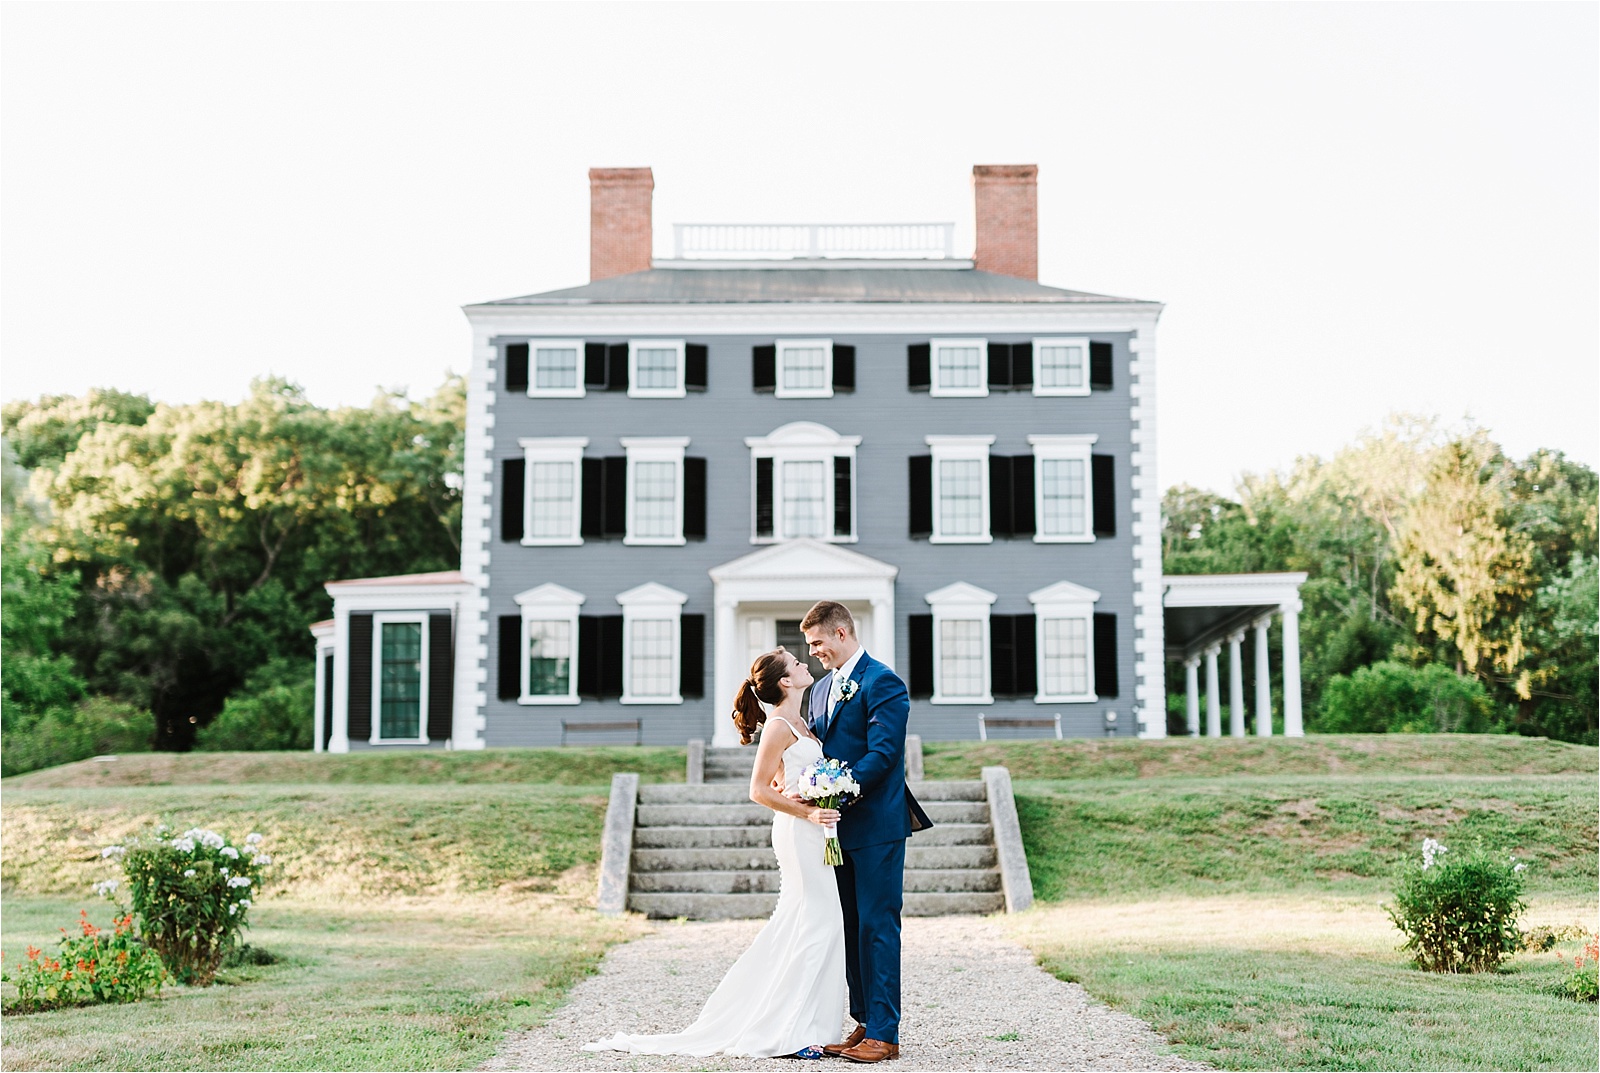 Relaxed Summer Wedding at Codman Estate in Lincoln, MA by Boston Wedding Photographer Annmarie Swift